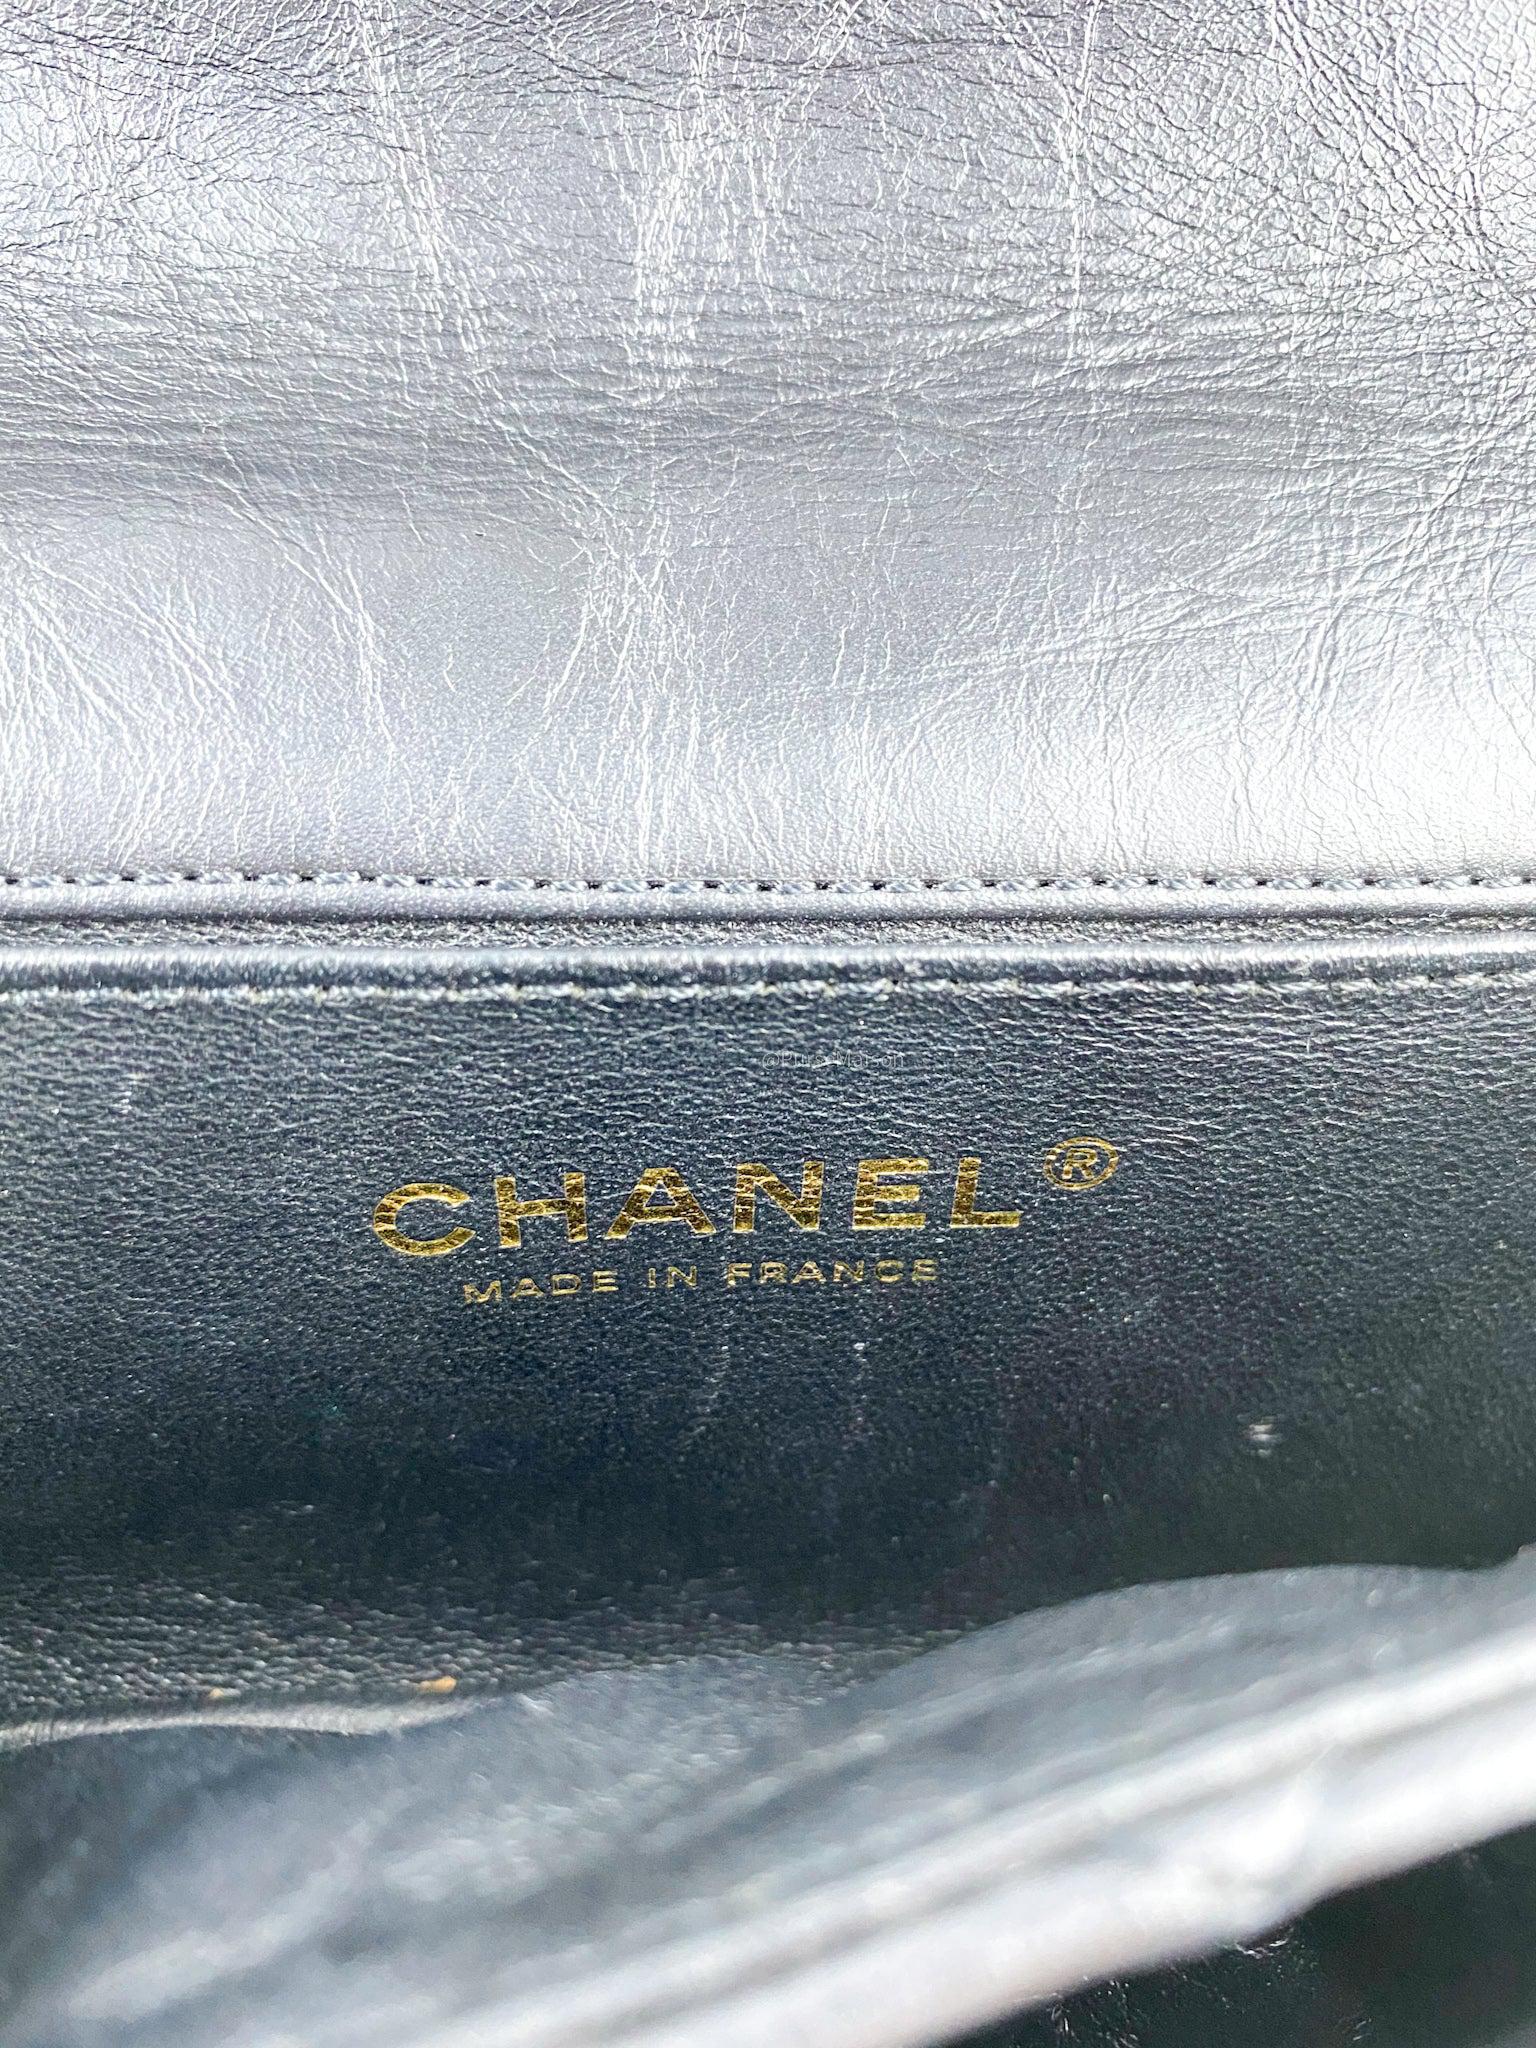 Chanel Reissue Waist Bag Black in Distressed Calfskin and Gold Hardware (Series 26)